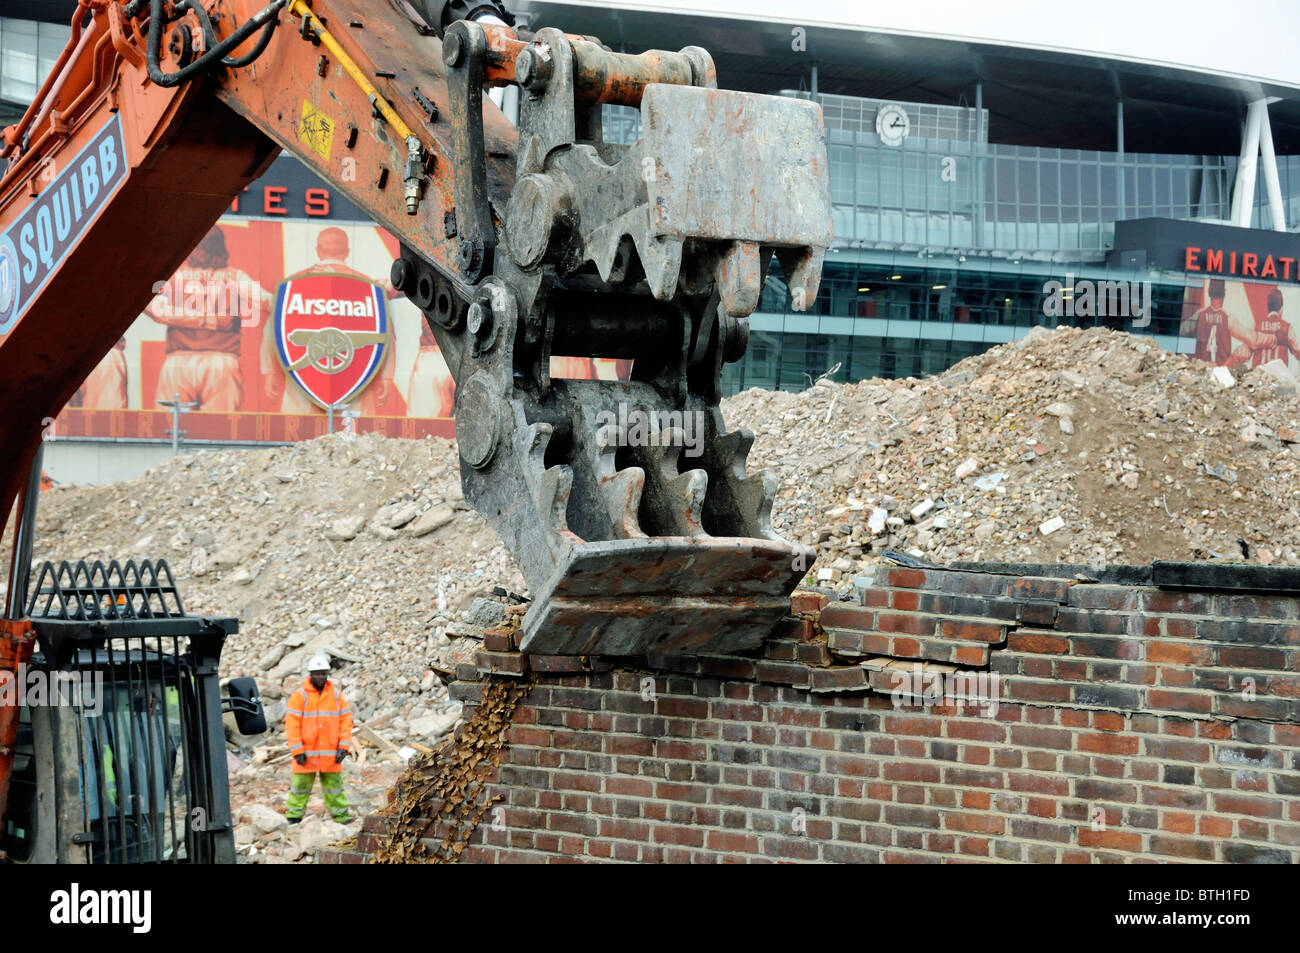 Demolition site showing close up of a hydraulic pulverizer on the arm of an excavator demolishing a wall Arsenal Emirates Stadium in background Stock Photo